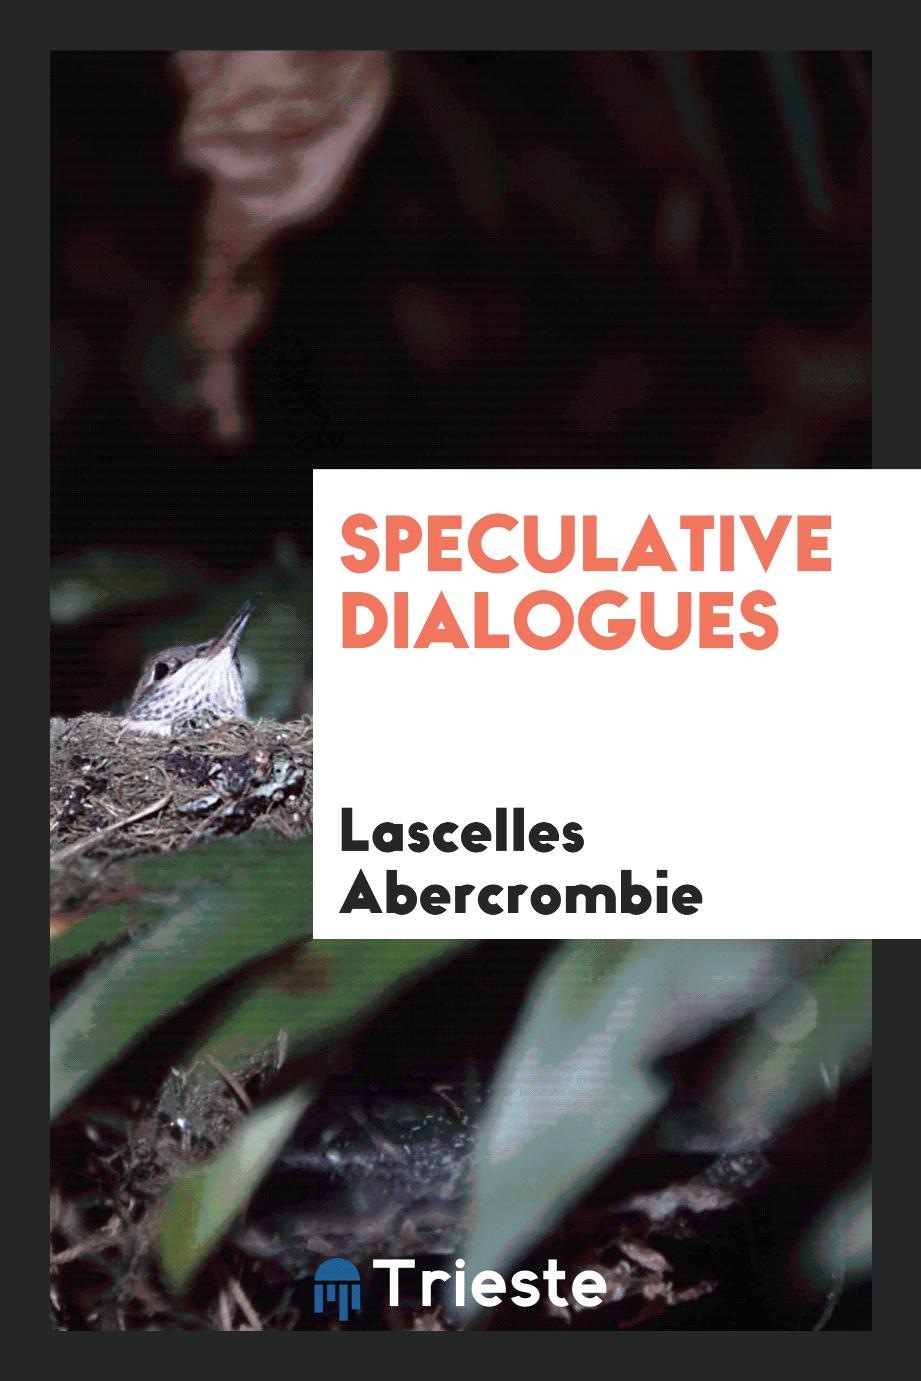 Speculative dialogues